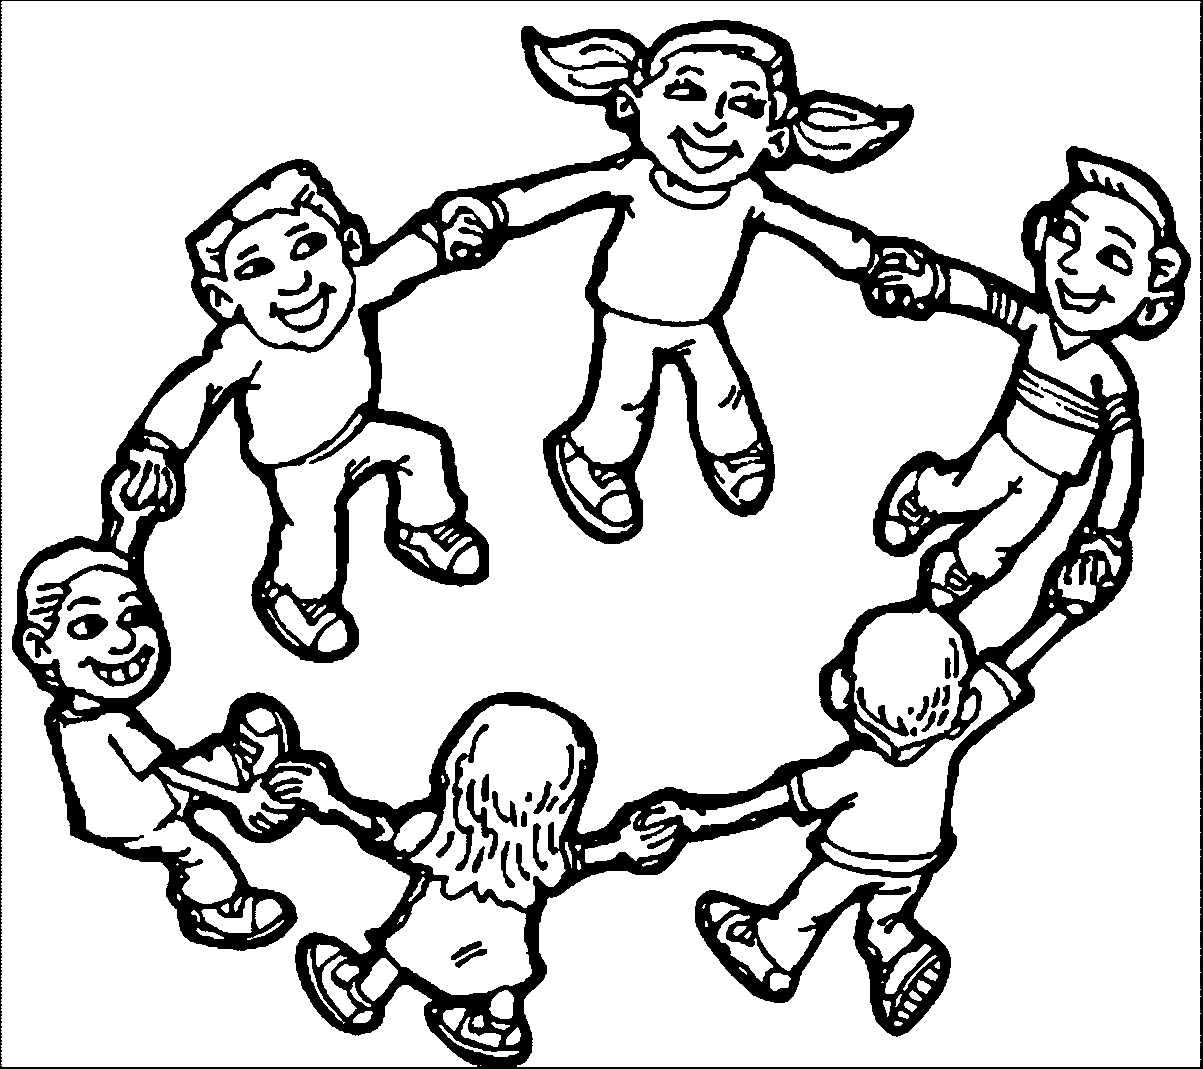 Playing Children Coloring Page | Wecoloringpage